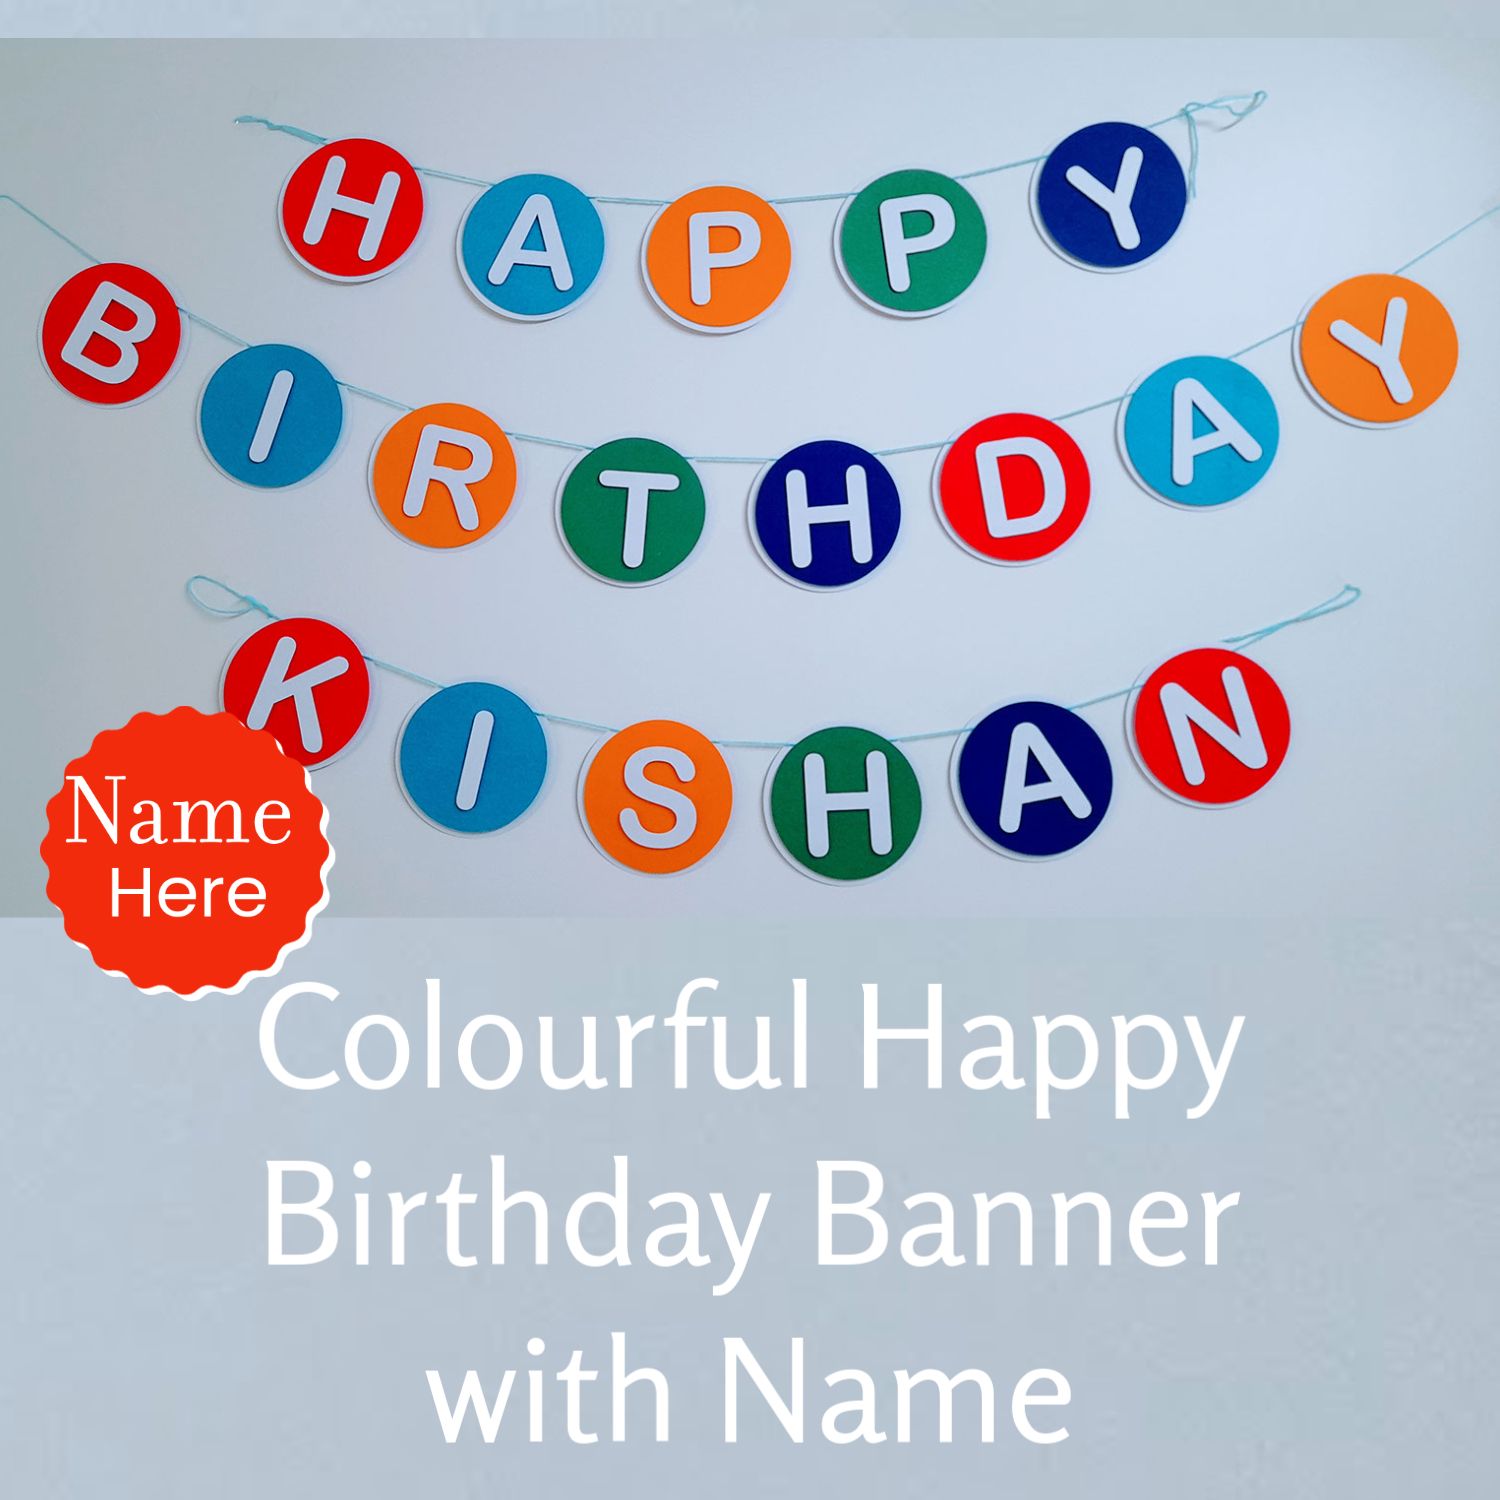 Partybus - Colourful Happy Birthday Banner | Vibrant colours Happy Birthday Banner | Happy Birthday Name Banner | Custom Name Birthday Banner